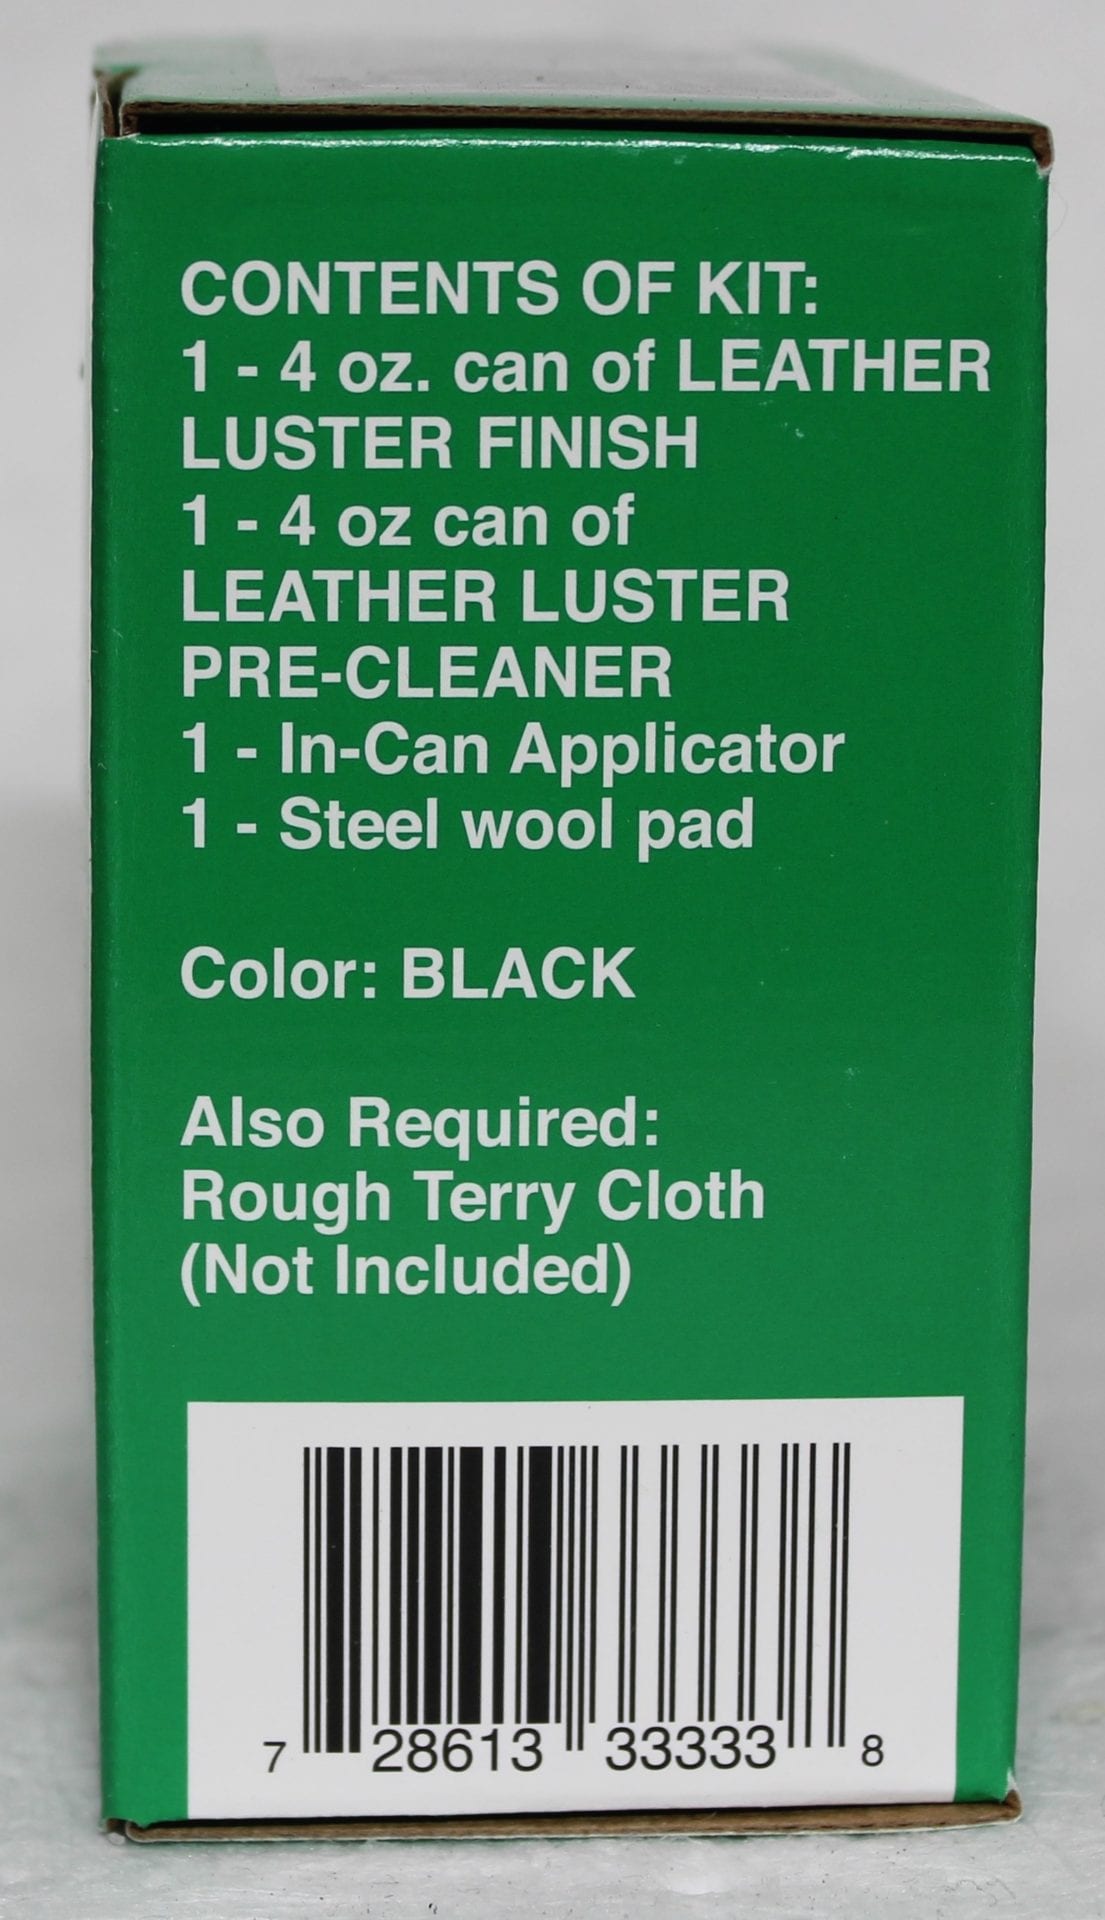 Leather Luster Leather Luster Kit